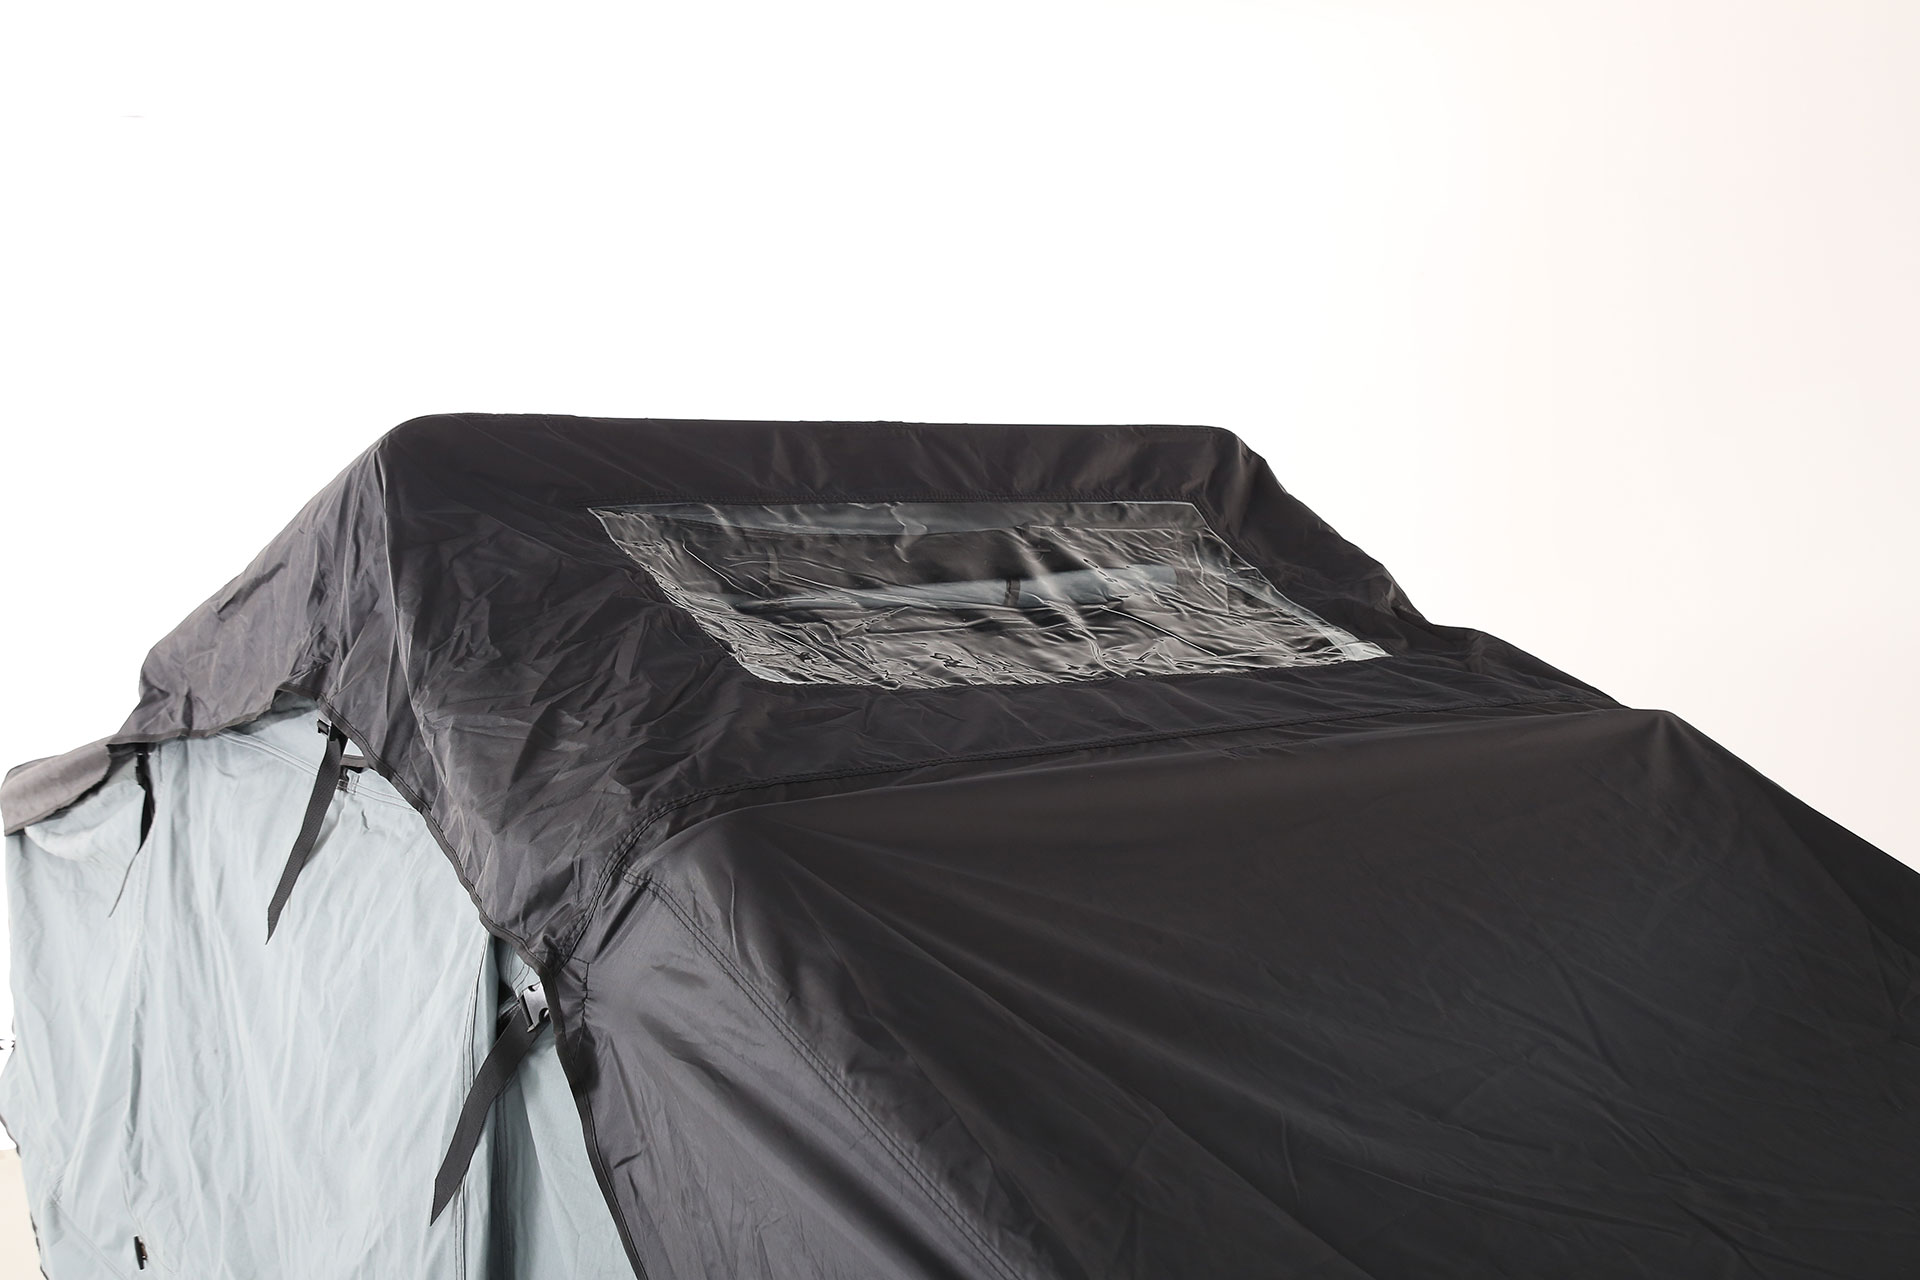 Body Armor Pike 2-Person tent